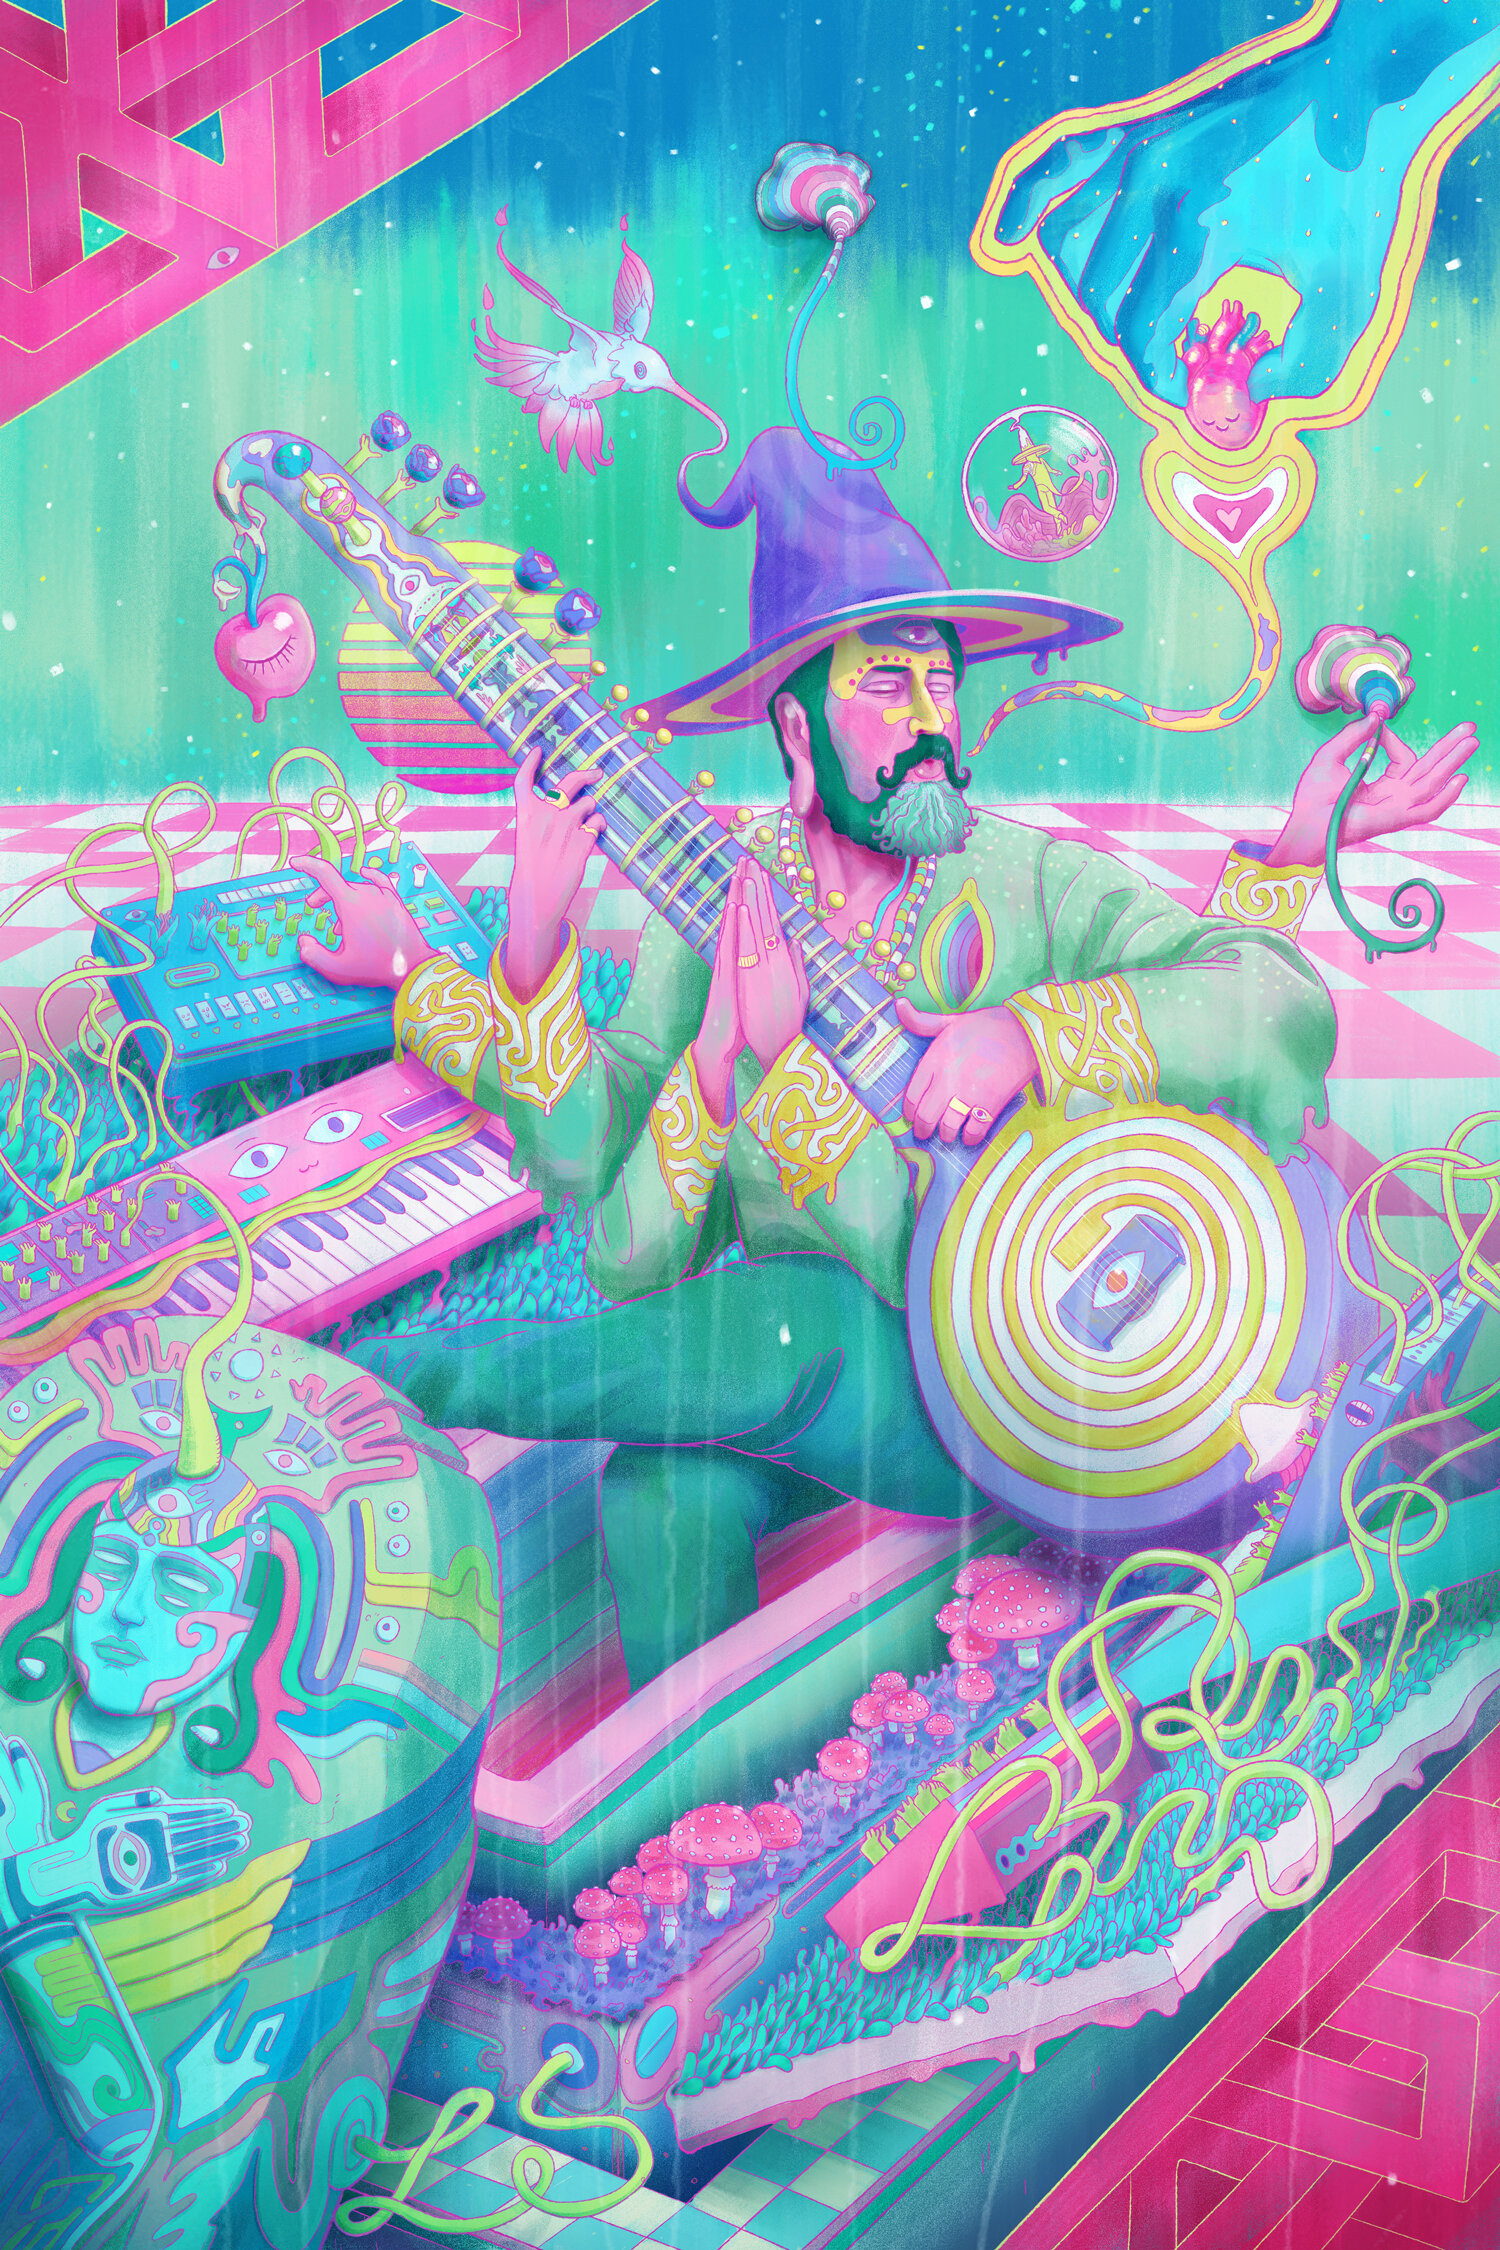 bardo-duncan-trussell-midnight-gospel-psychedelic-trippy-painting-mikee-atendido.jpg